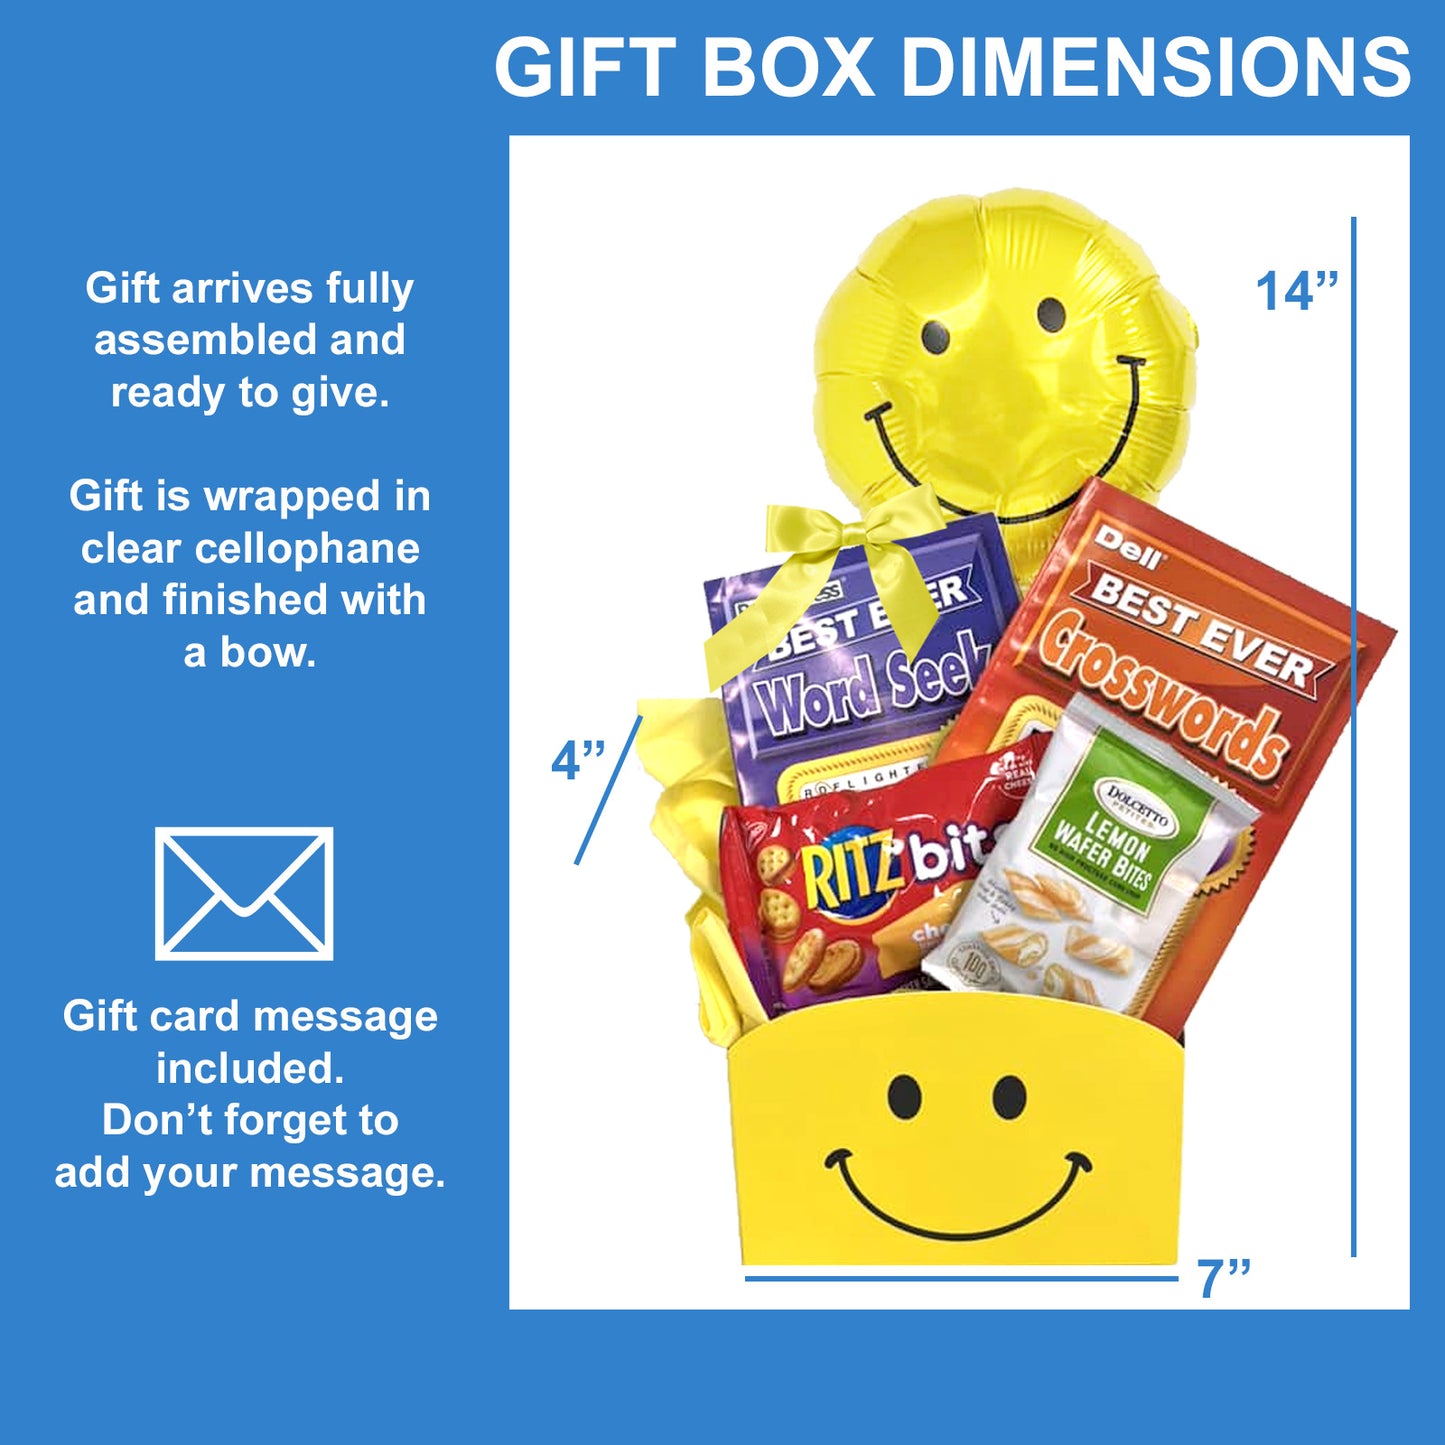 Cheer Up Gift Box for Get Well, Thinking of You, After Surgery, Recovery, Illness Gift Basket has Food and Boredom Busters for Men, Women, Friends and Family